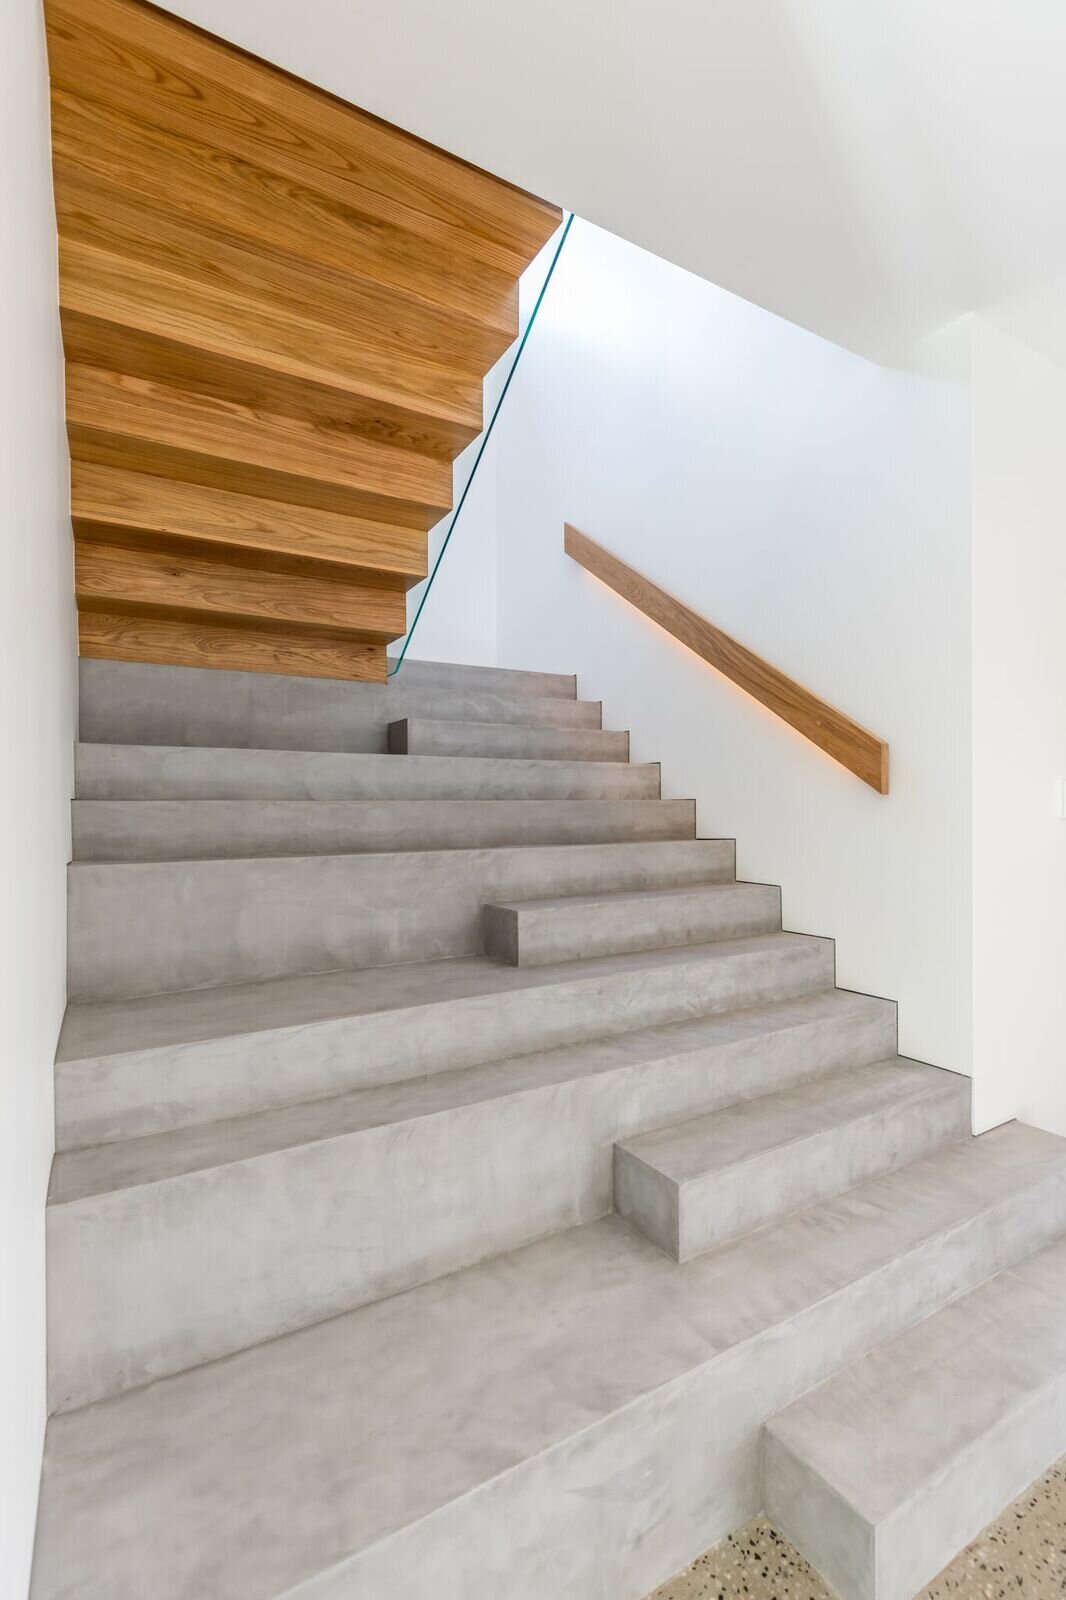 X-Bond Microcement Installed to Stairs